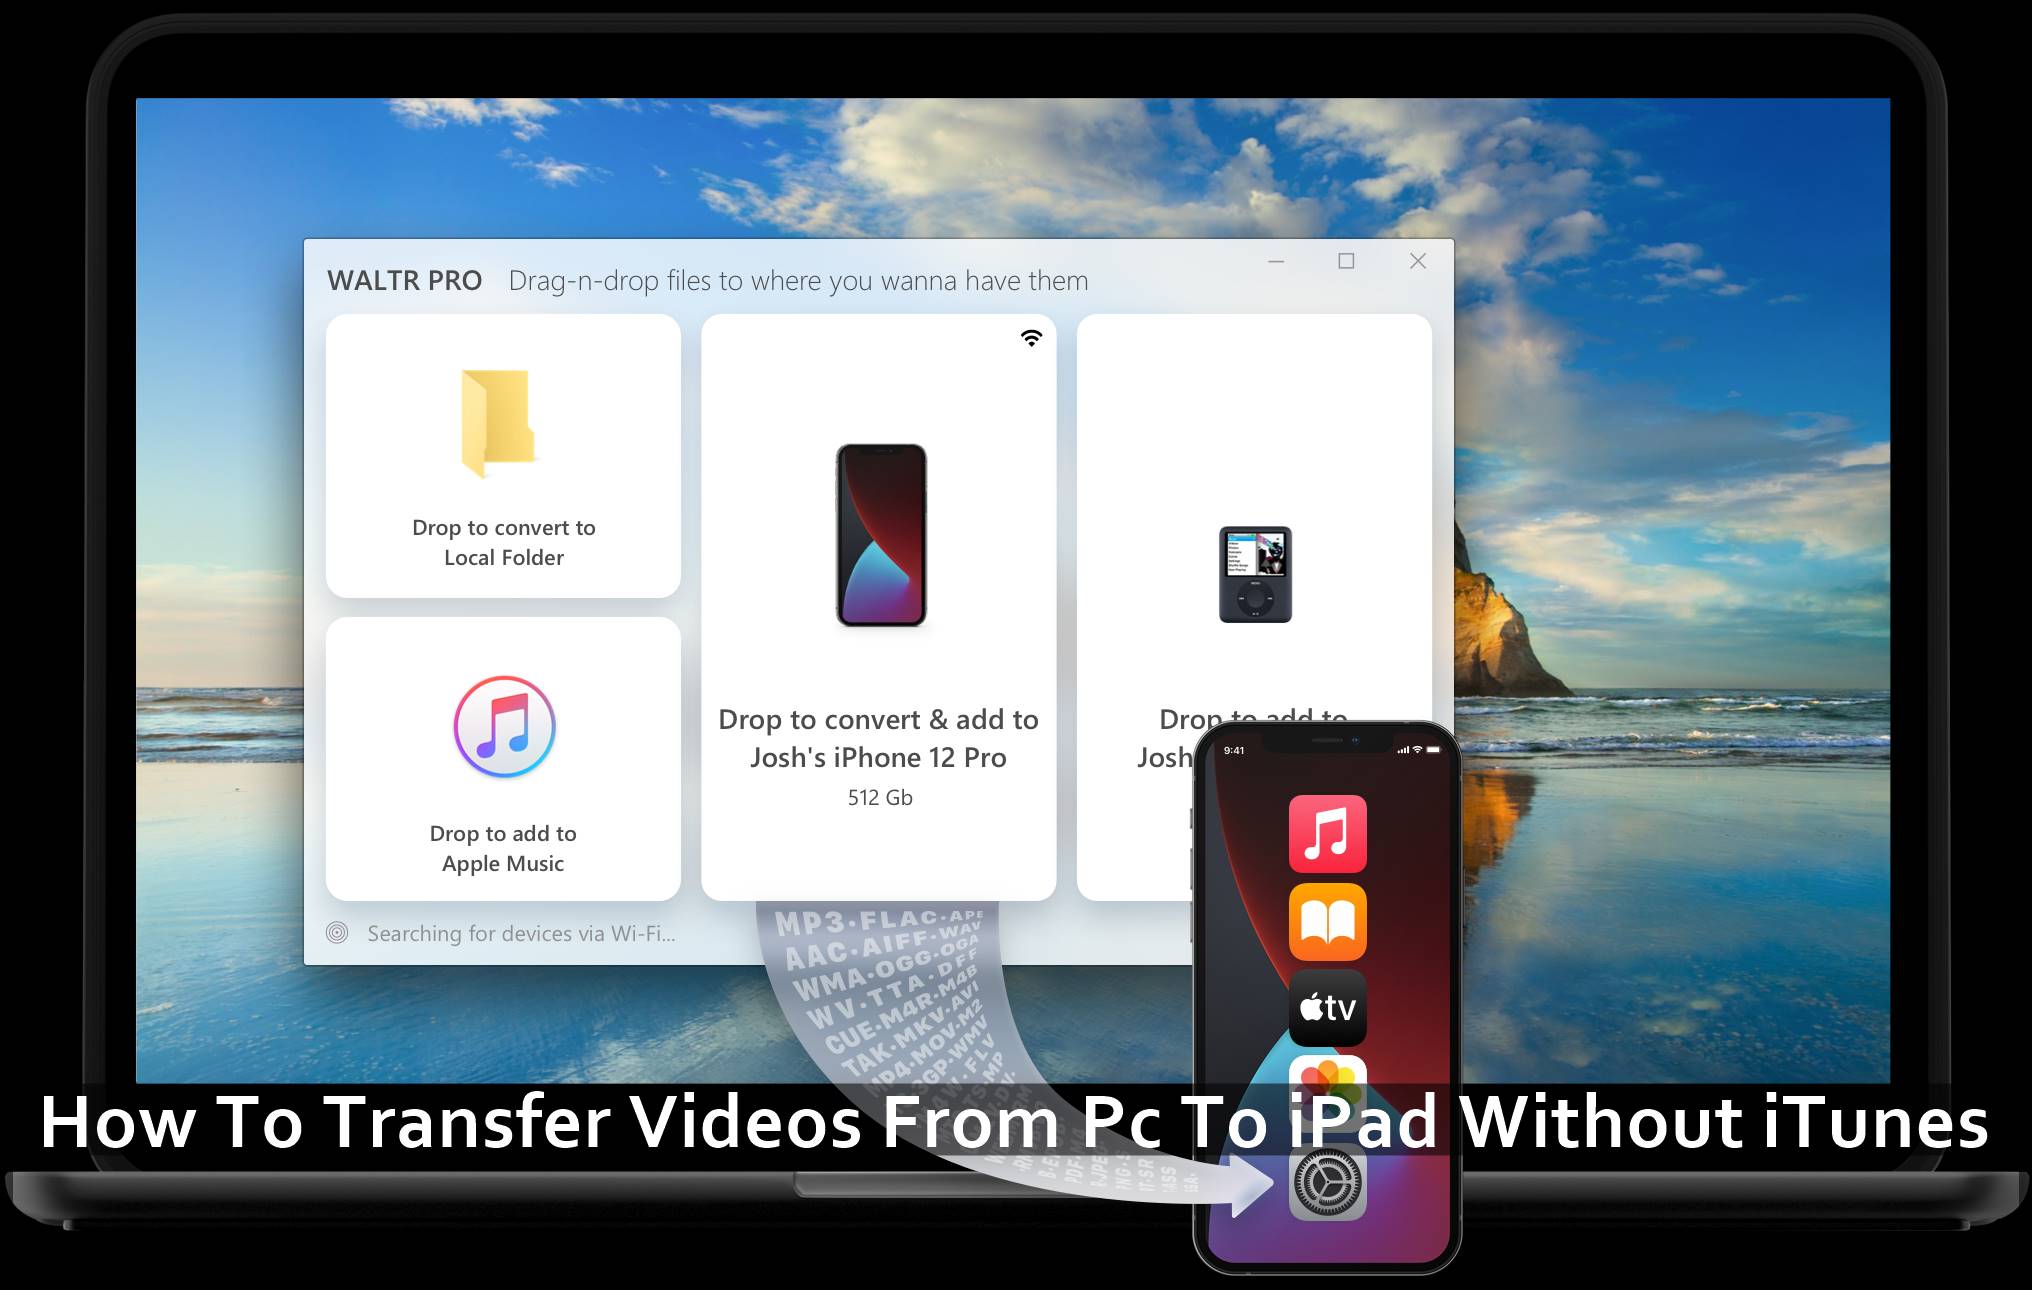 How To Transfer Videos From Pc To iPad Without iTunes